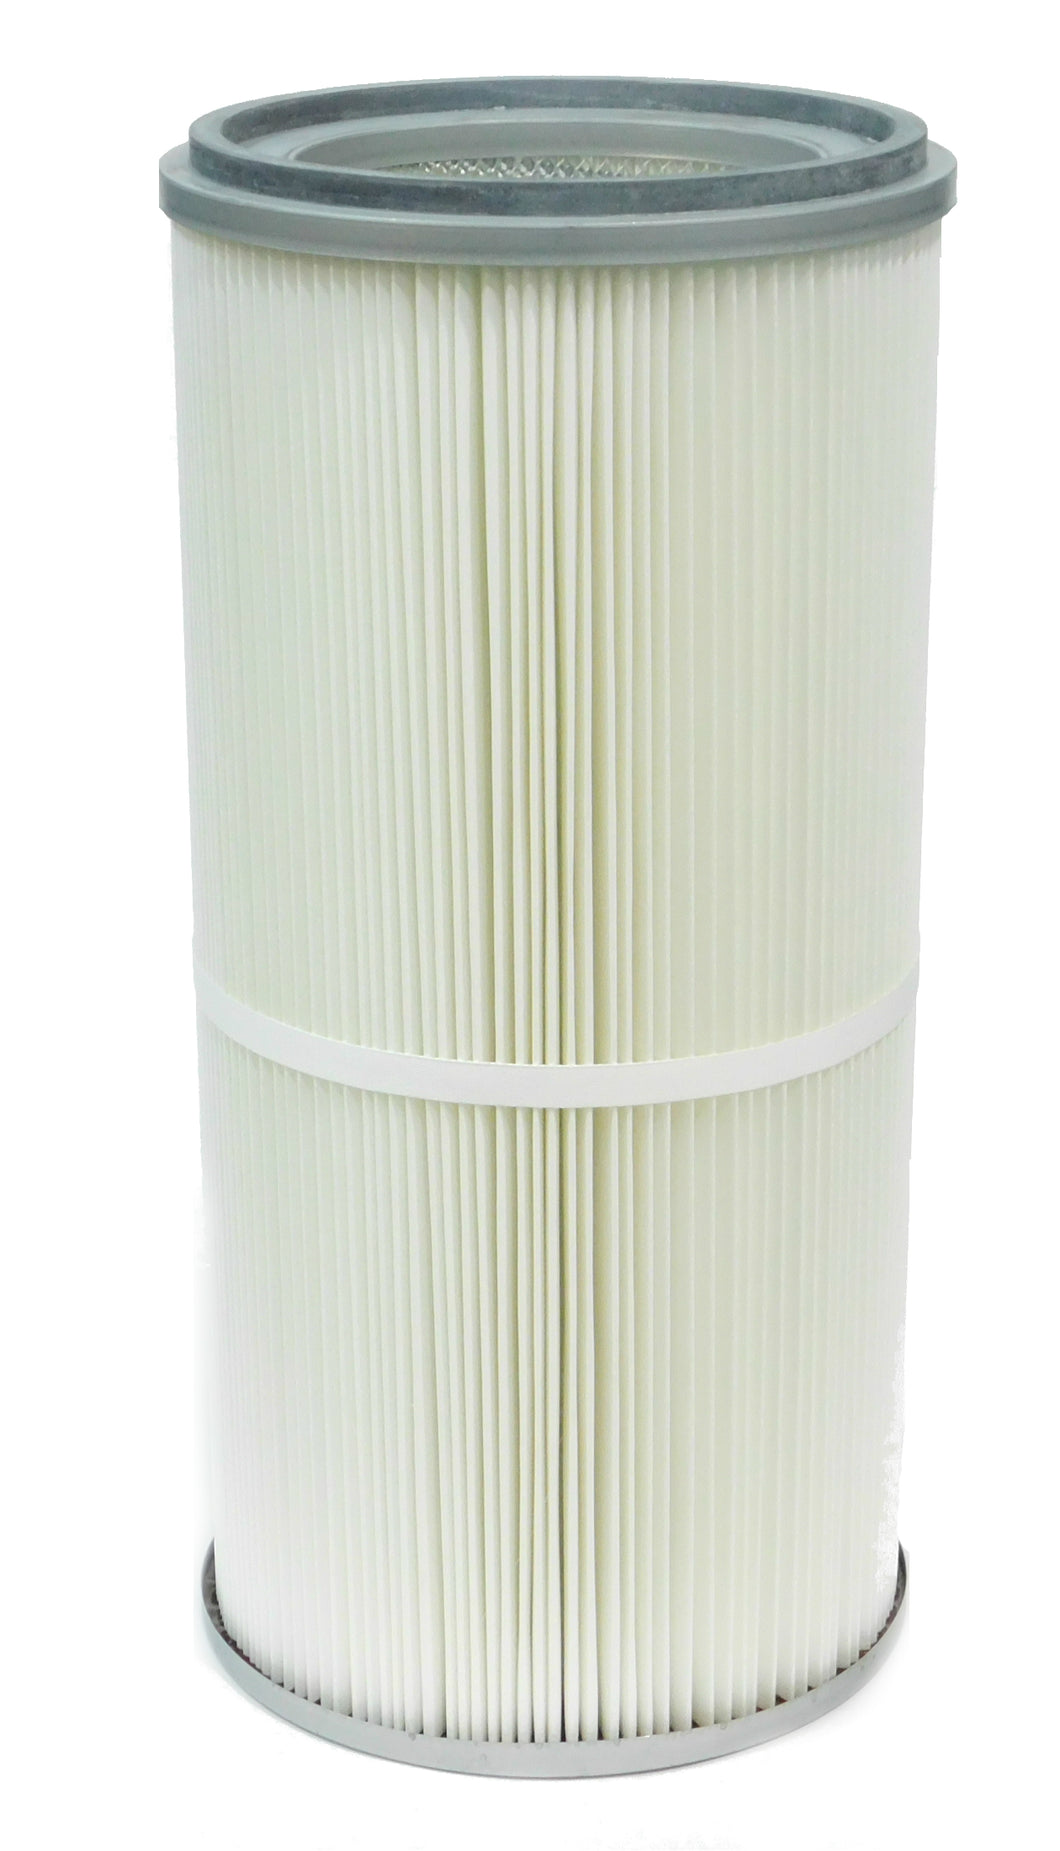 60-01-28 - Envirosystems - OEM Replacement Filter